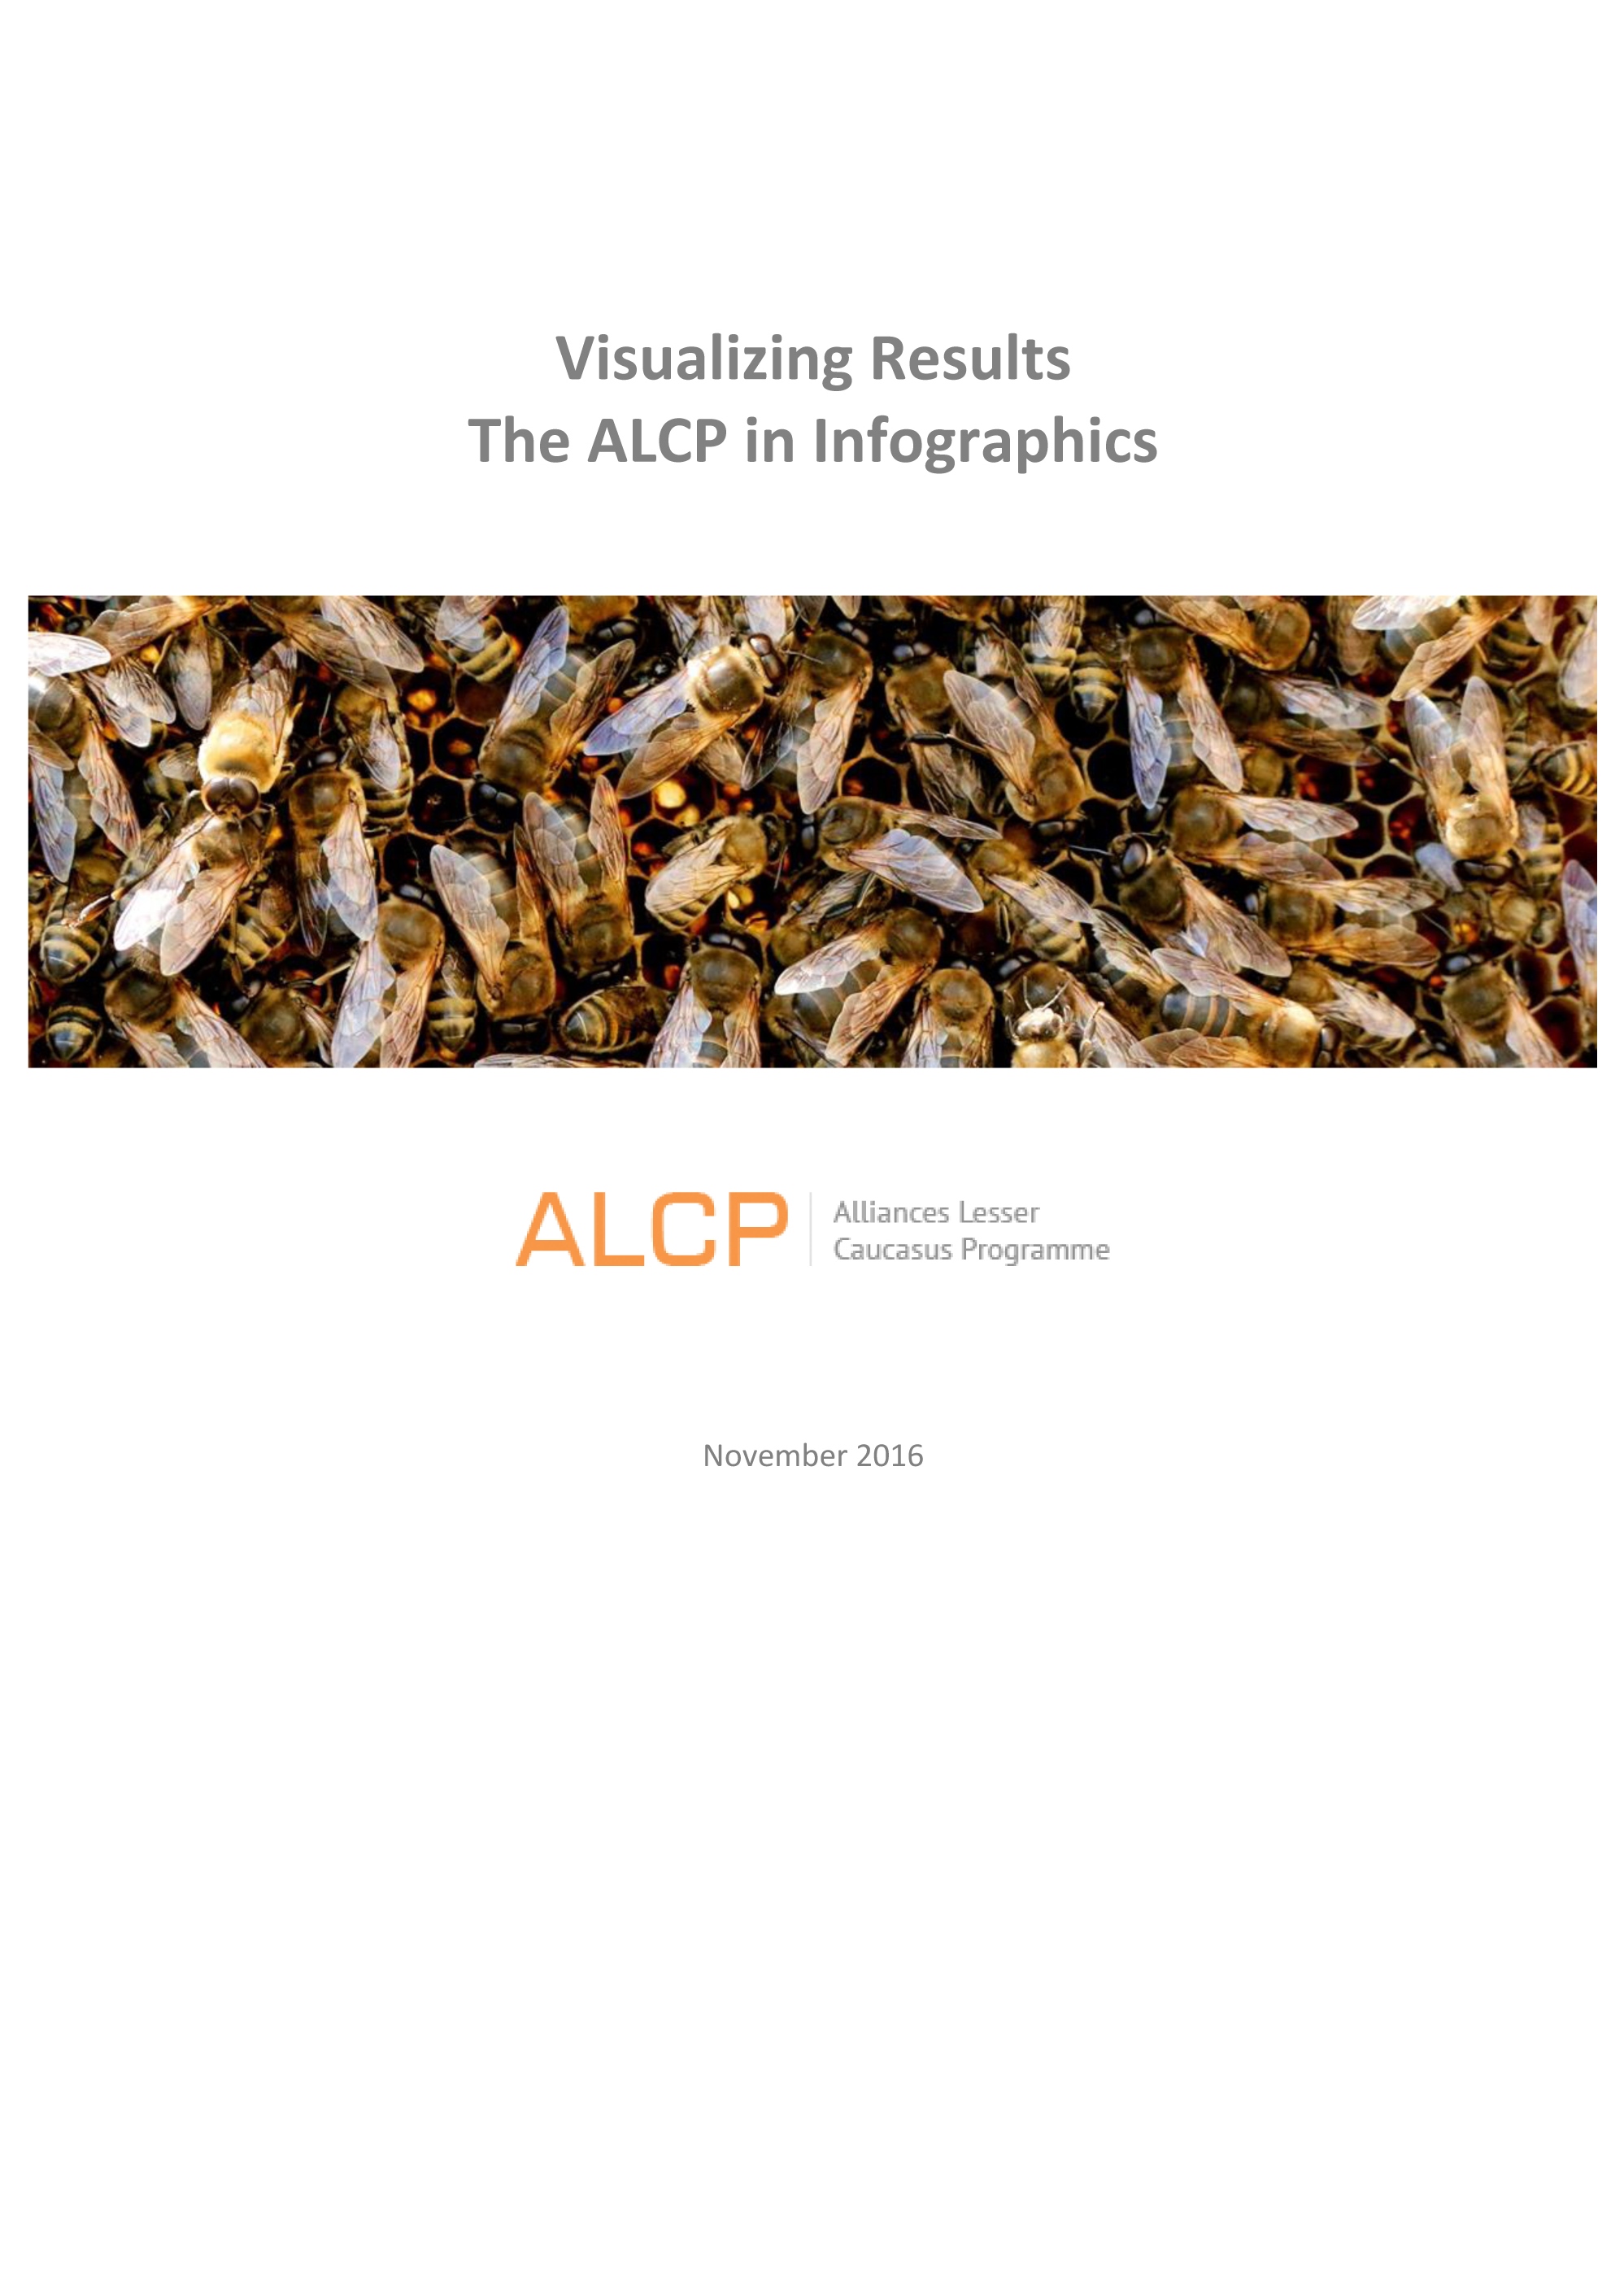 The ALCP in Infographics